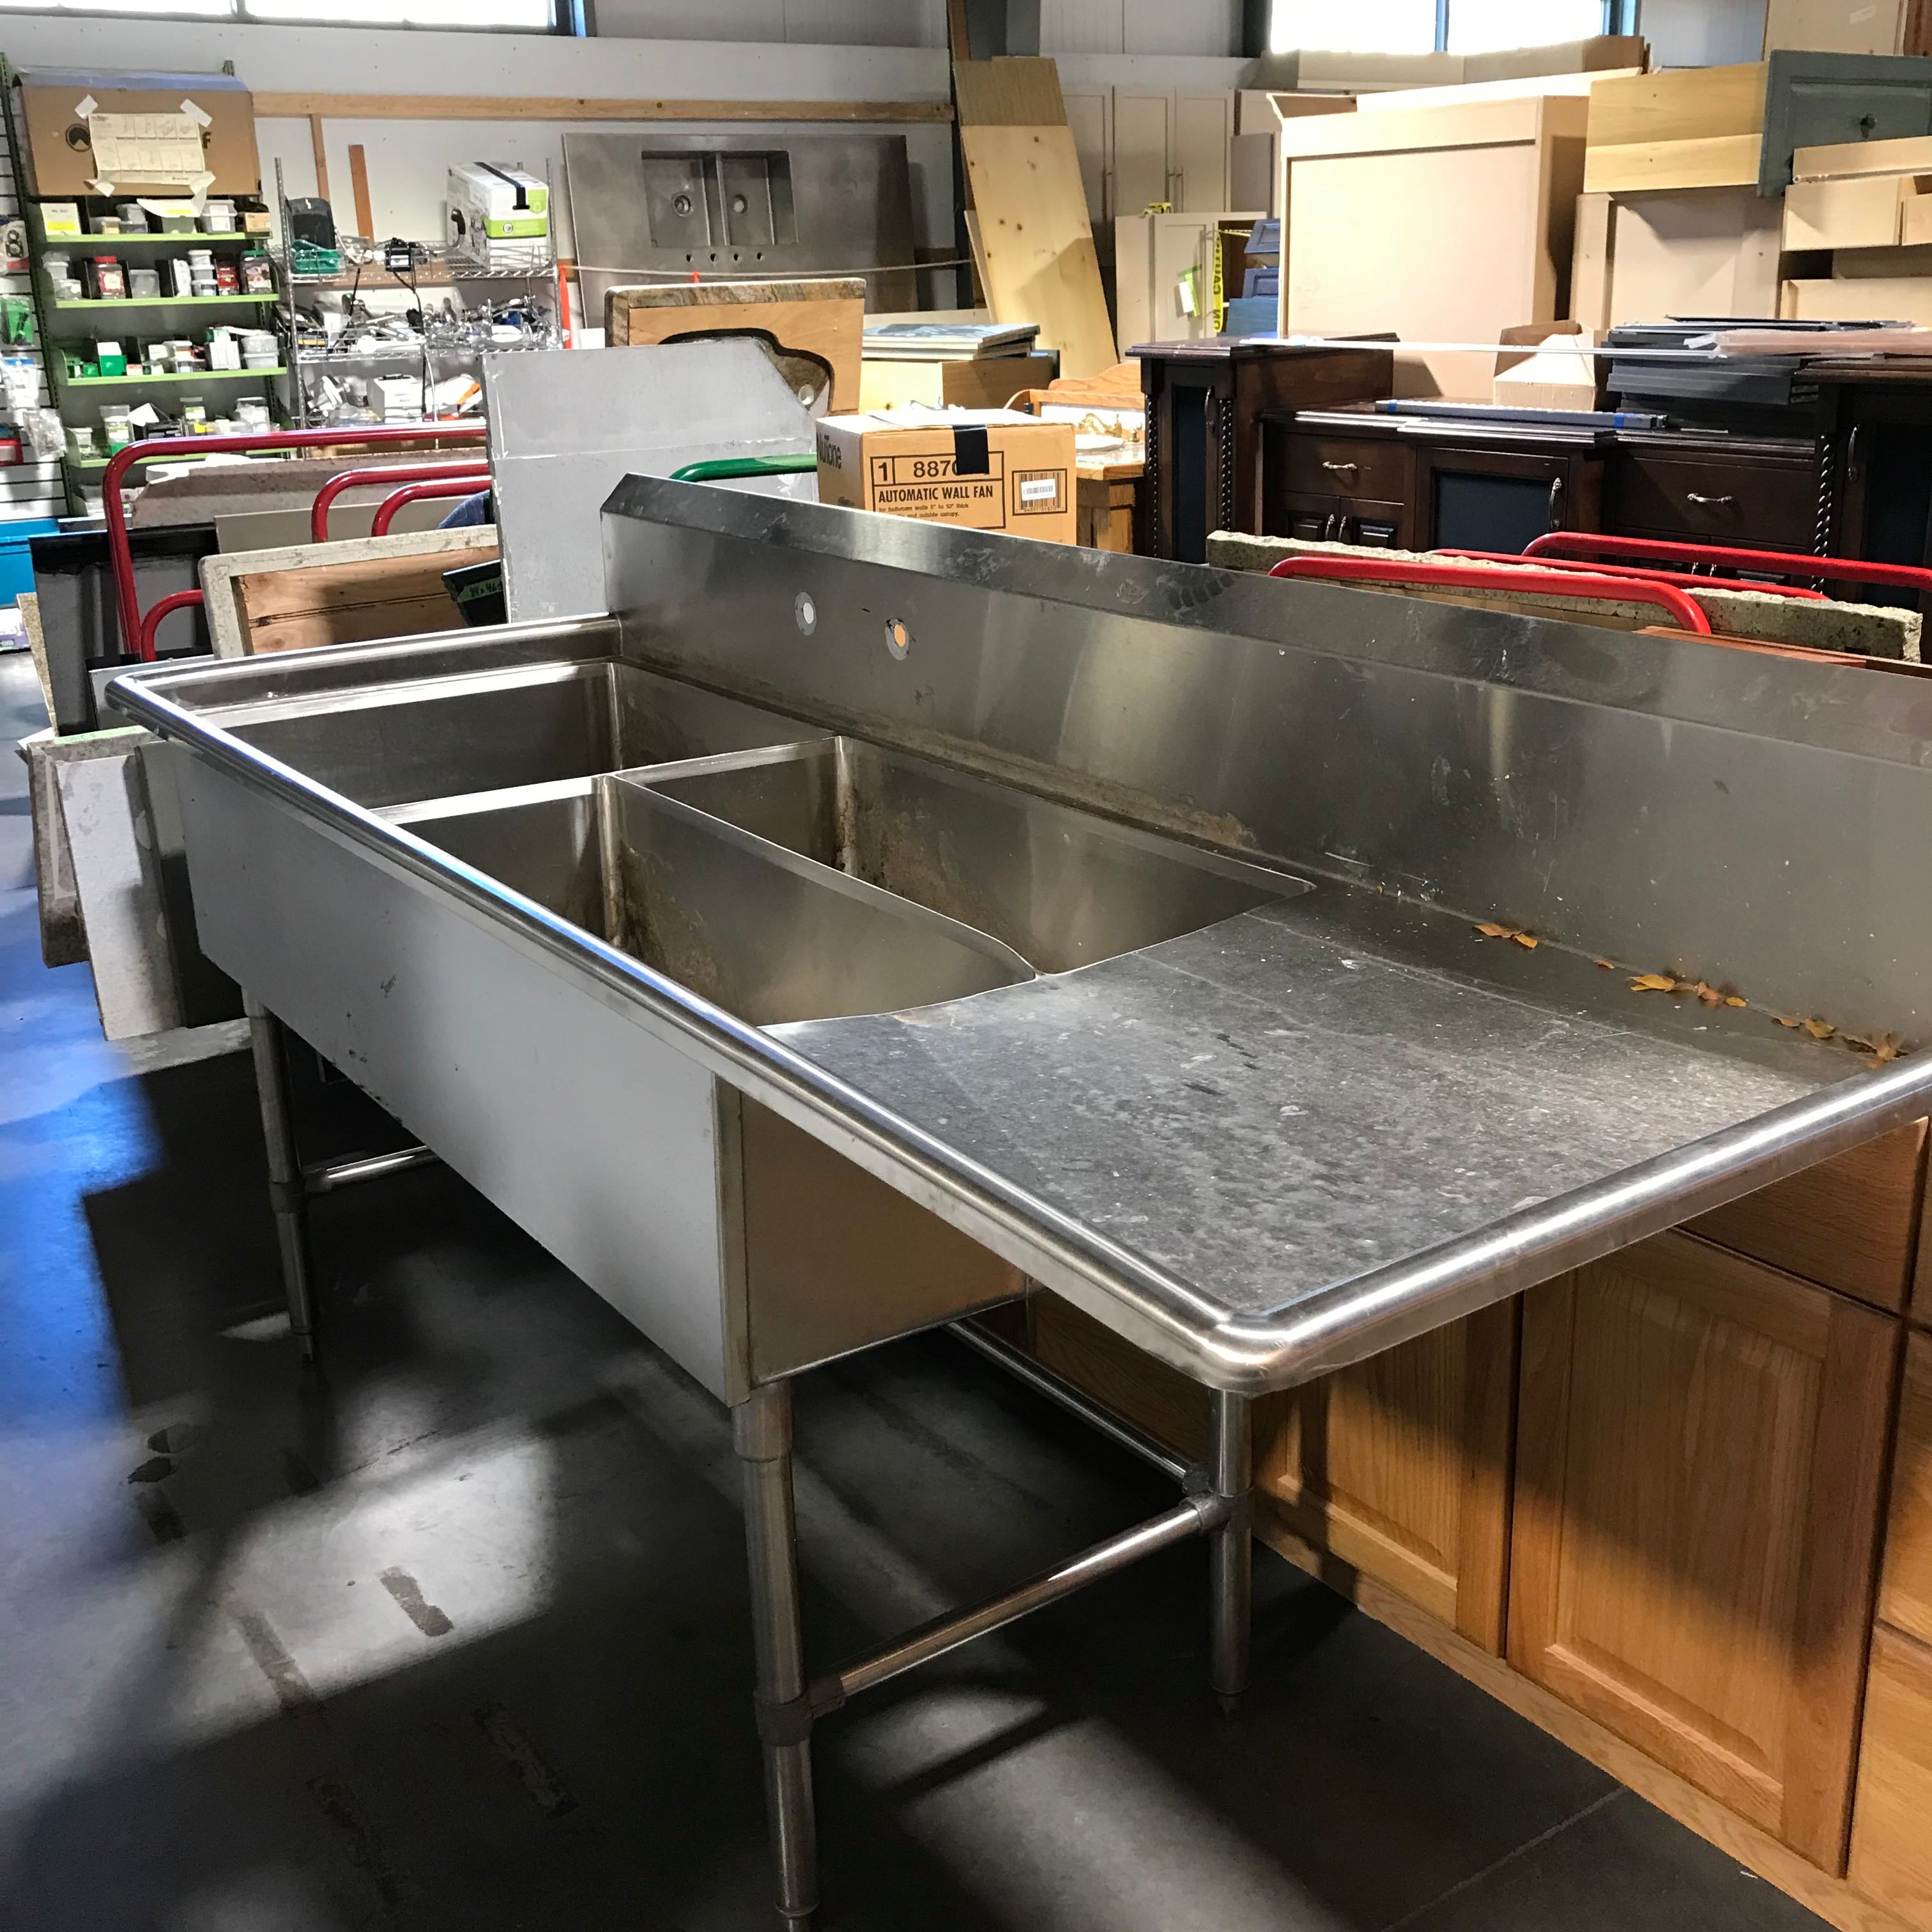 Boos Stainless Steel with Legs Commercial Kitchen Sink